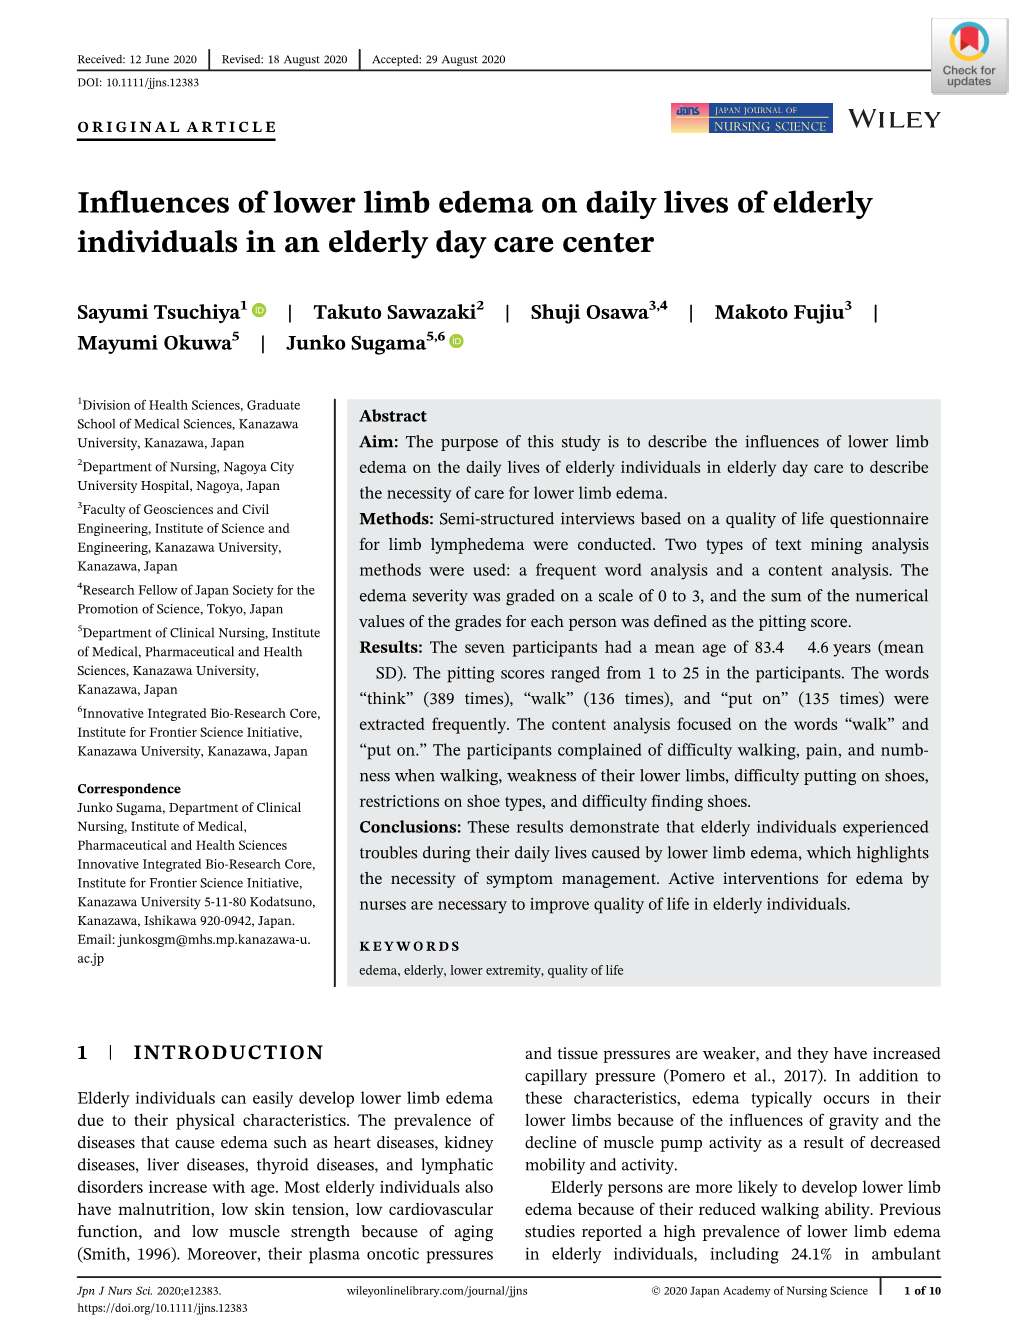 Influences of Lower Limb Edema on Daily Lives of Elderly Individuals in an Elderly Day Care Center